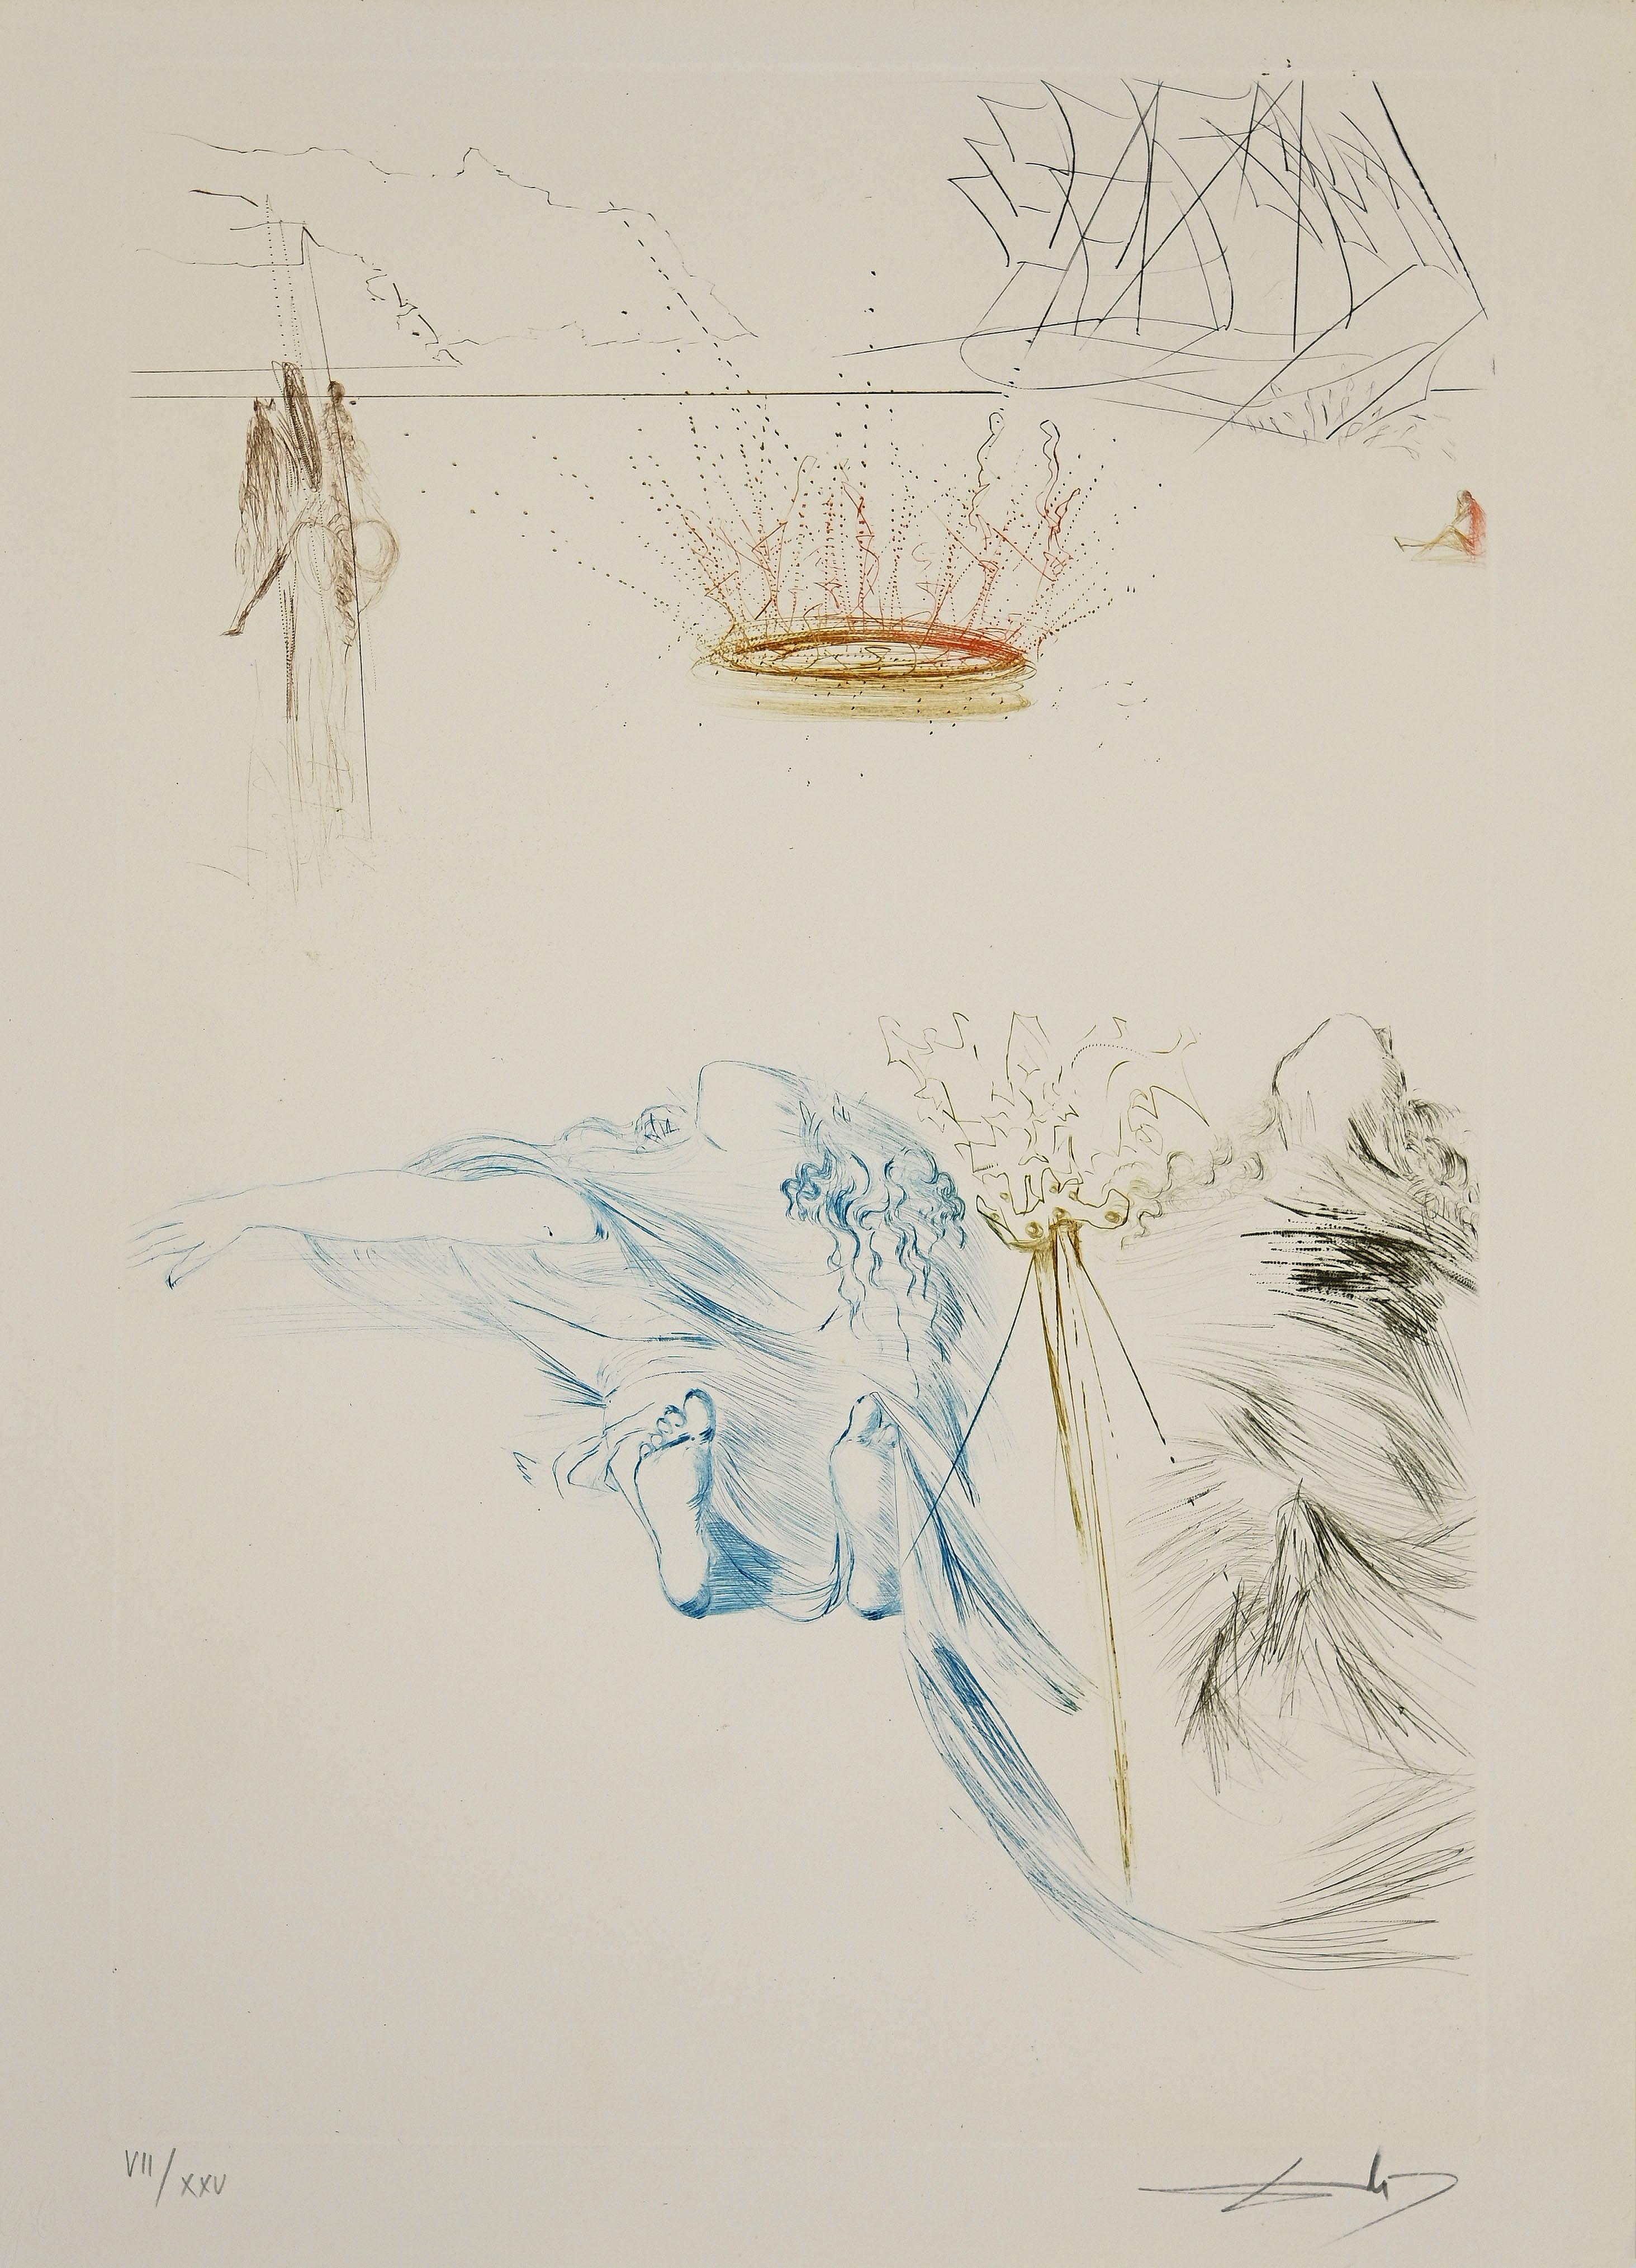 Salvador Dalí Abstract Print - Tristan's Testament - Original Etching and Drypoint by S. Dalì - 1969